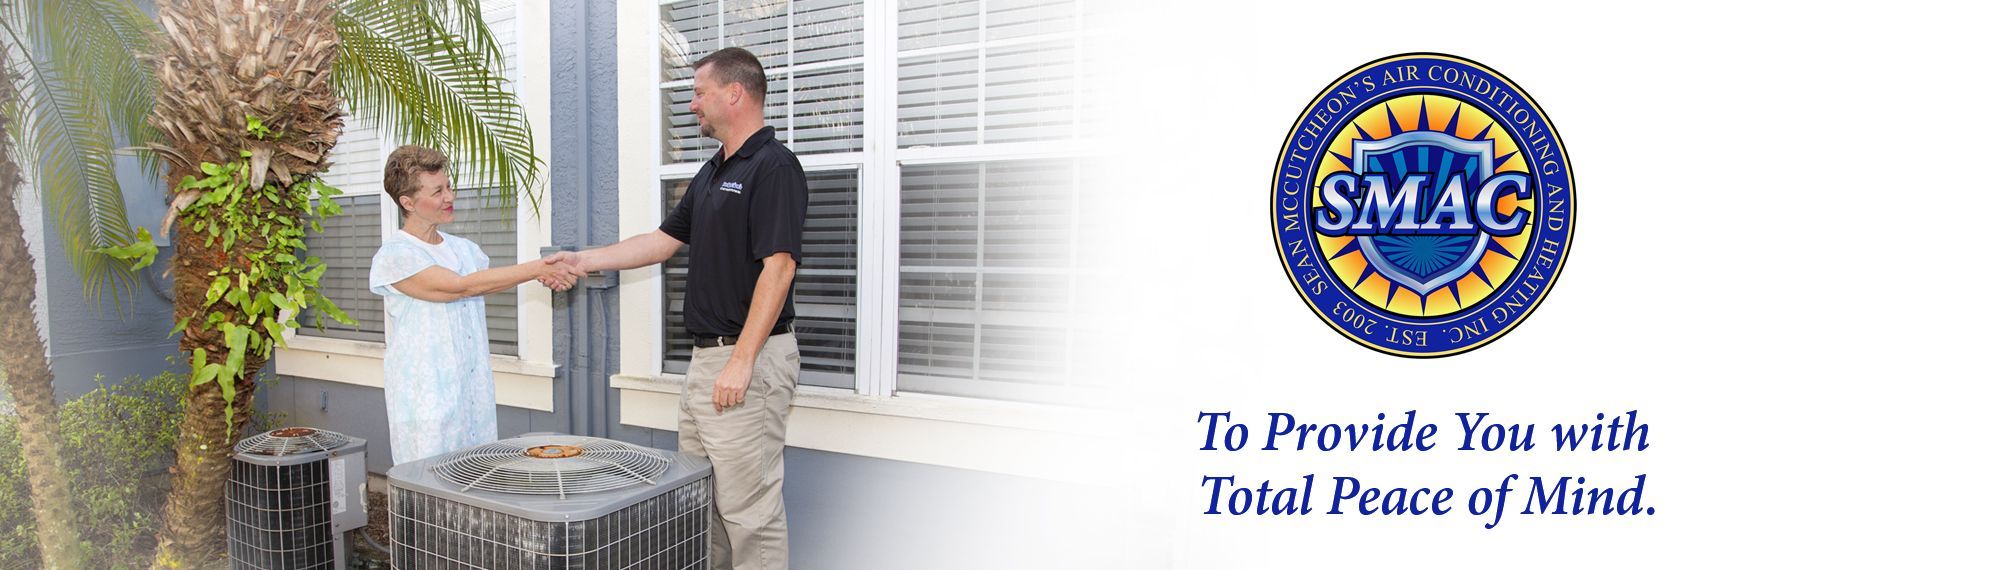  Sean McCutcheon's Air Conditioning and Heating Sarasota total peace of mind